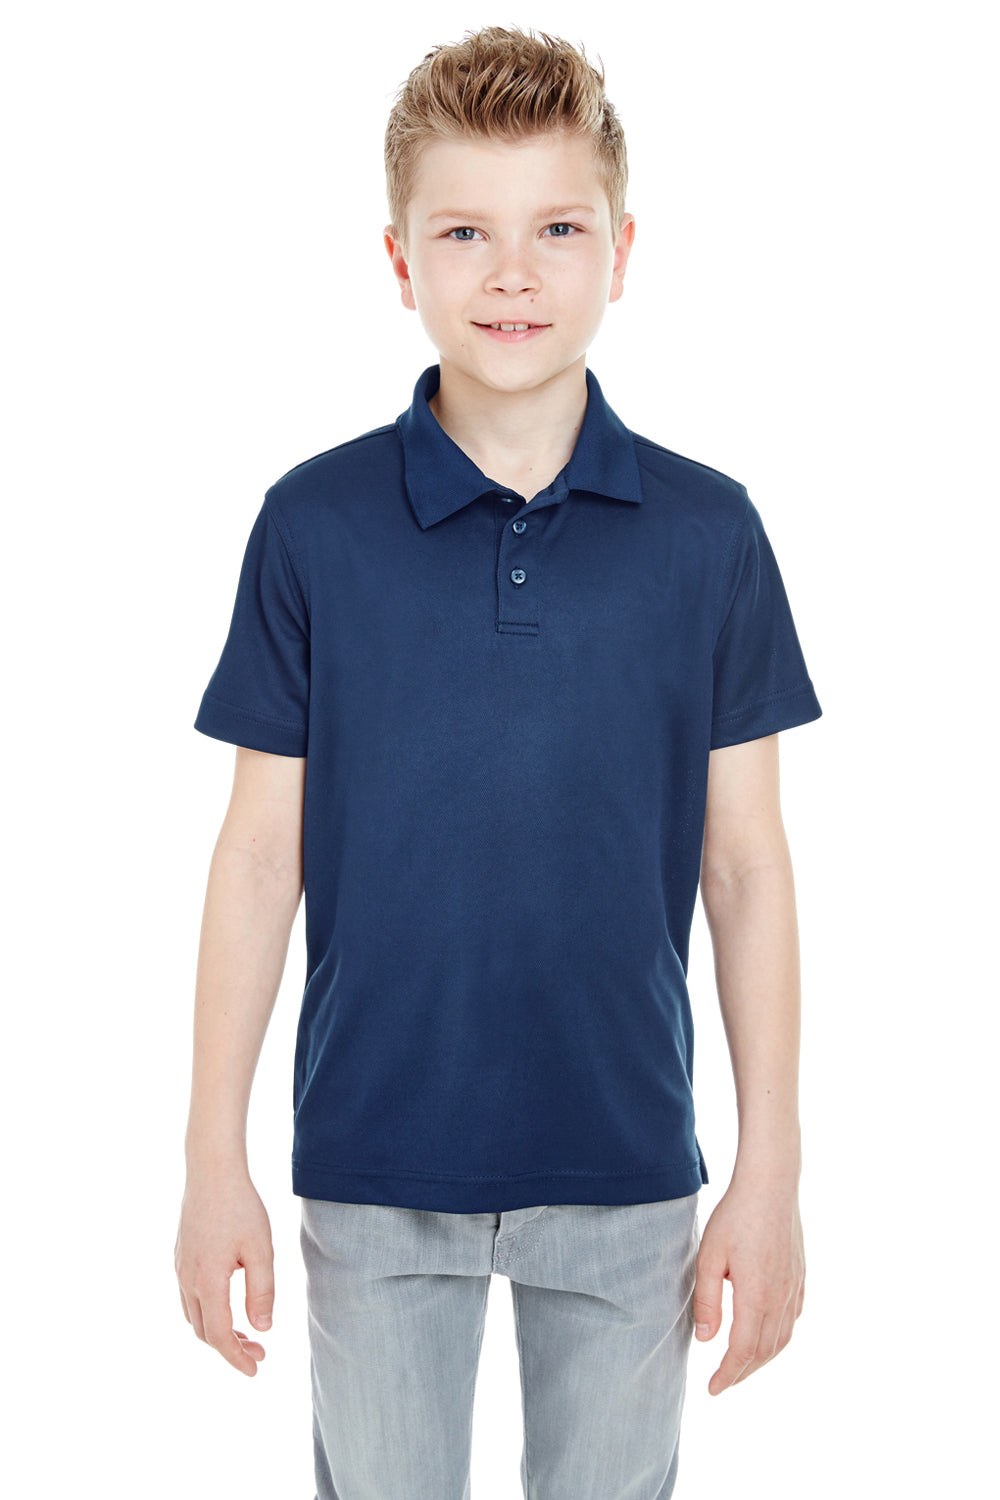 UltraClub 8210Y Youth Cool & Dry Moisture Wicking Short Sleeve Polo Shirt Navy Blue Front